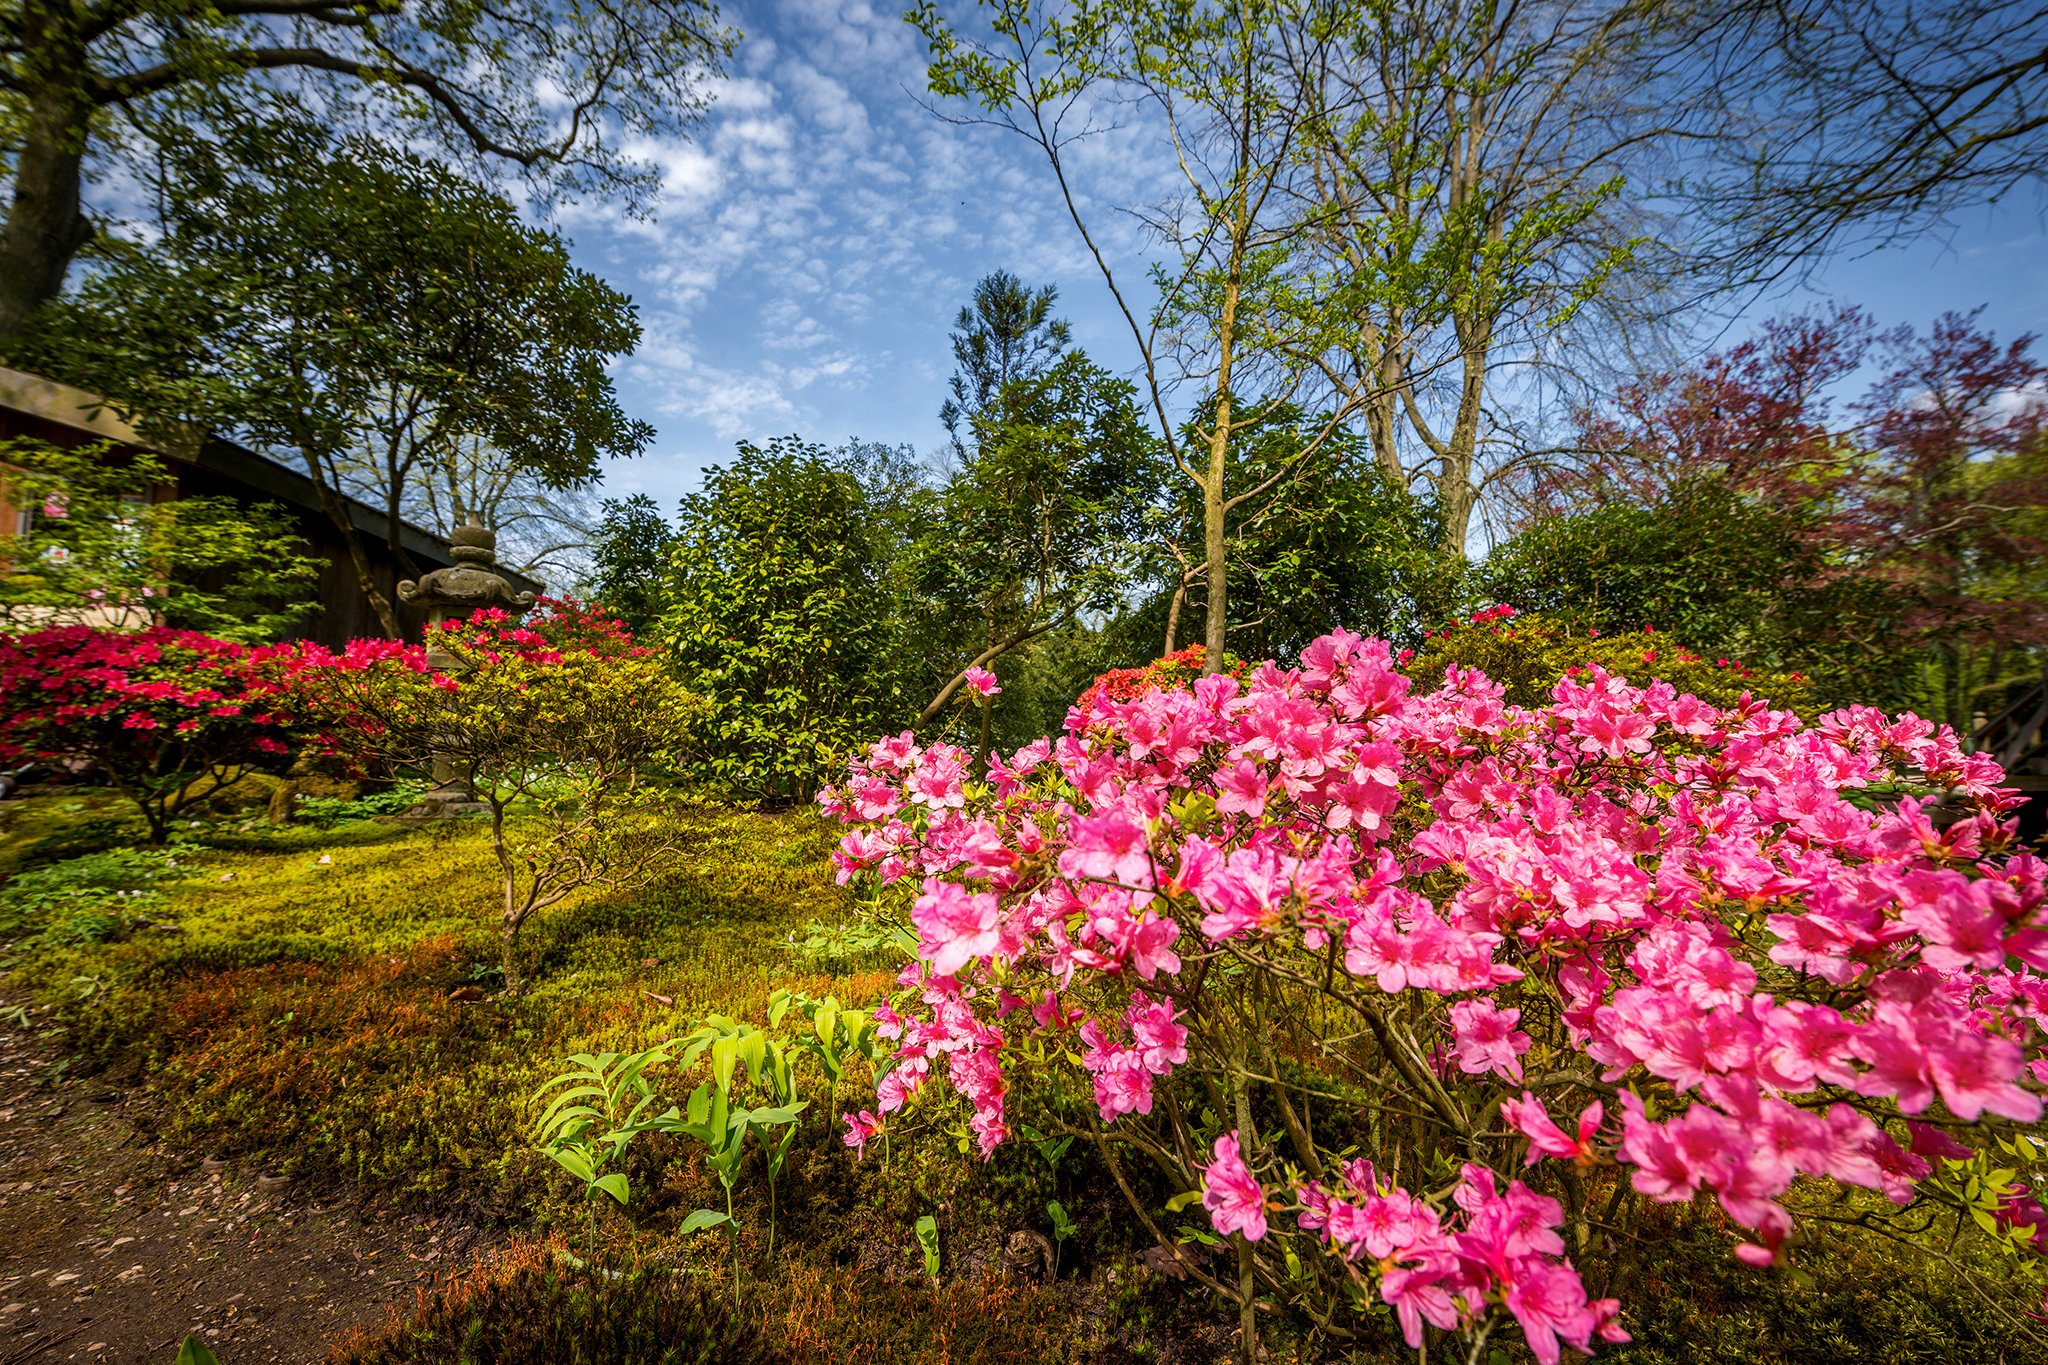 parks, Rhododendron, Shrubs, Trees, Nature Wallpaper